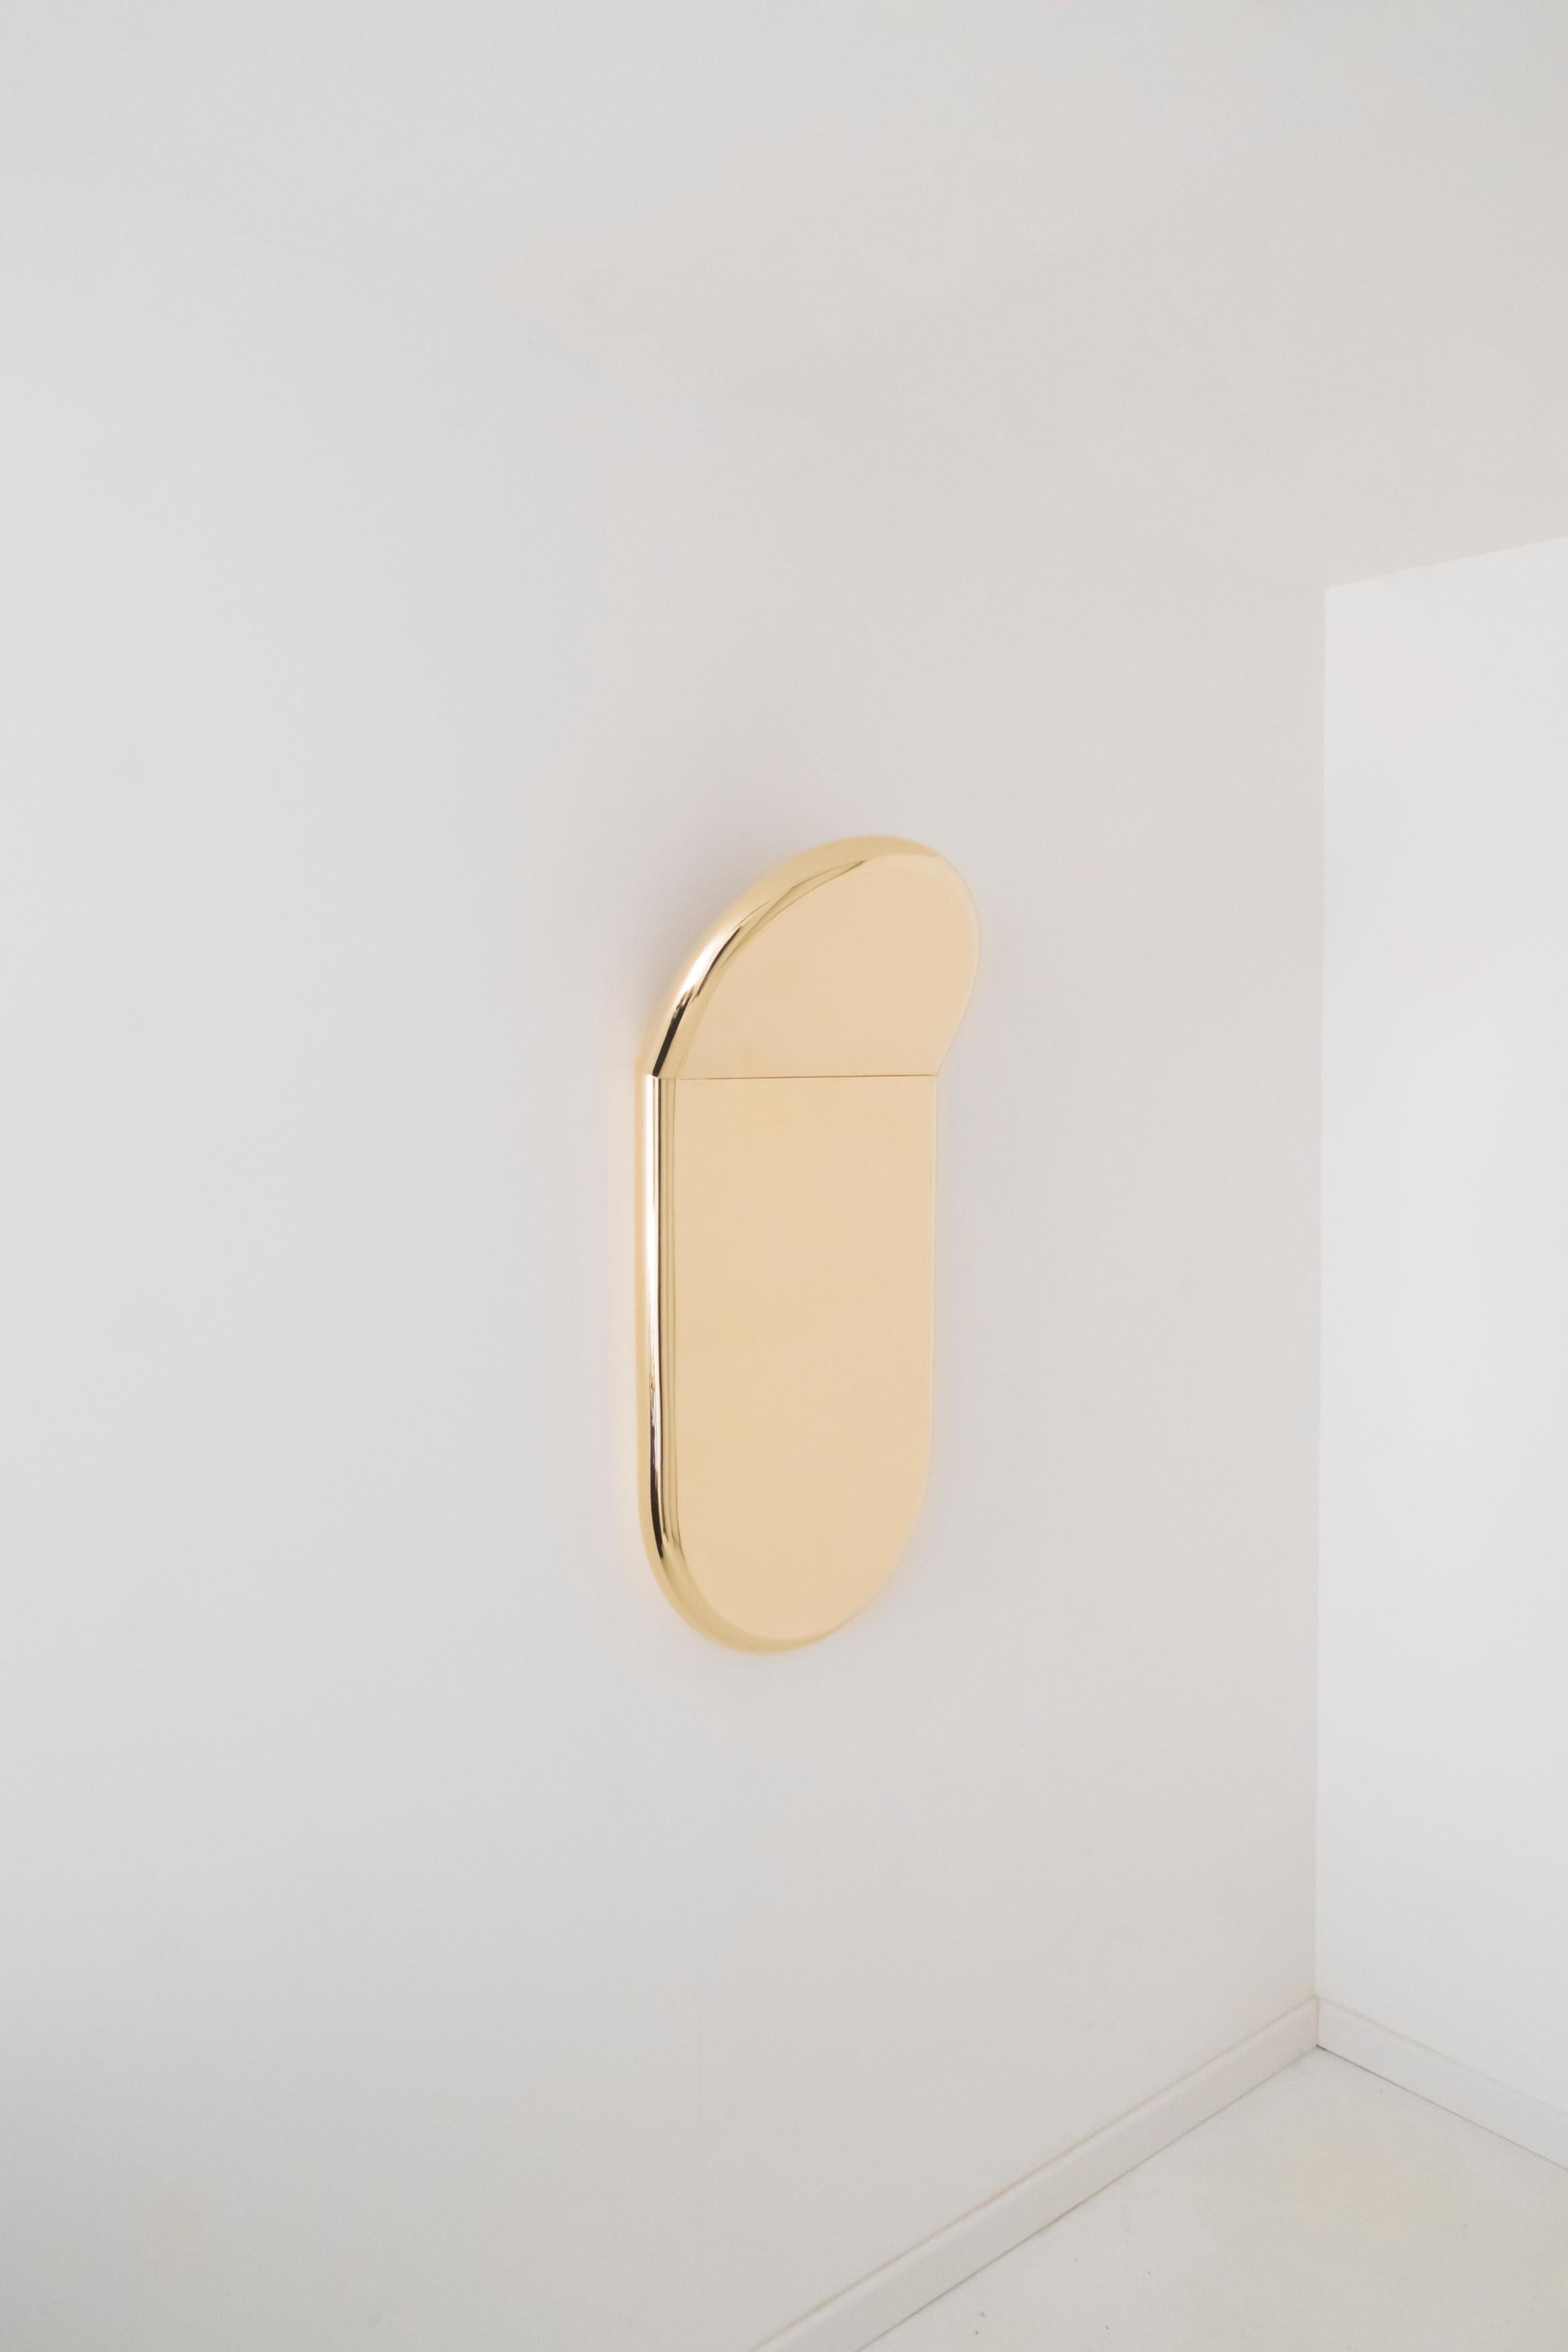 Slice wall mirror by Helder Barbosa
Materials: Polished brass
Dimensions: 83 x 40 x 5 cm

Trained as a craftsman (école Boulle, 2014), Helder Barbosa is a designer who lives and works in Paris.
Attracted by minimalist shapes, he creates